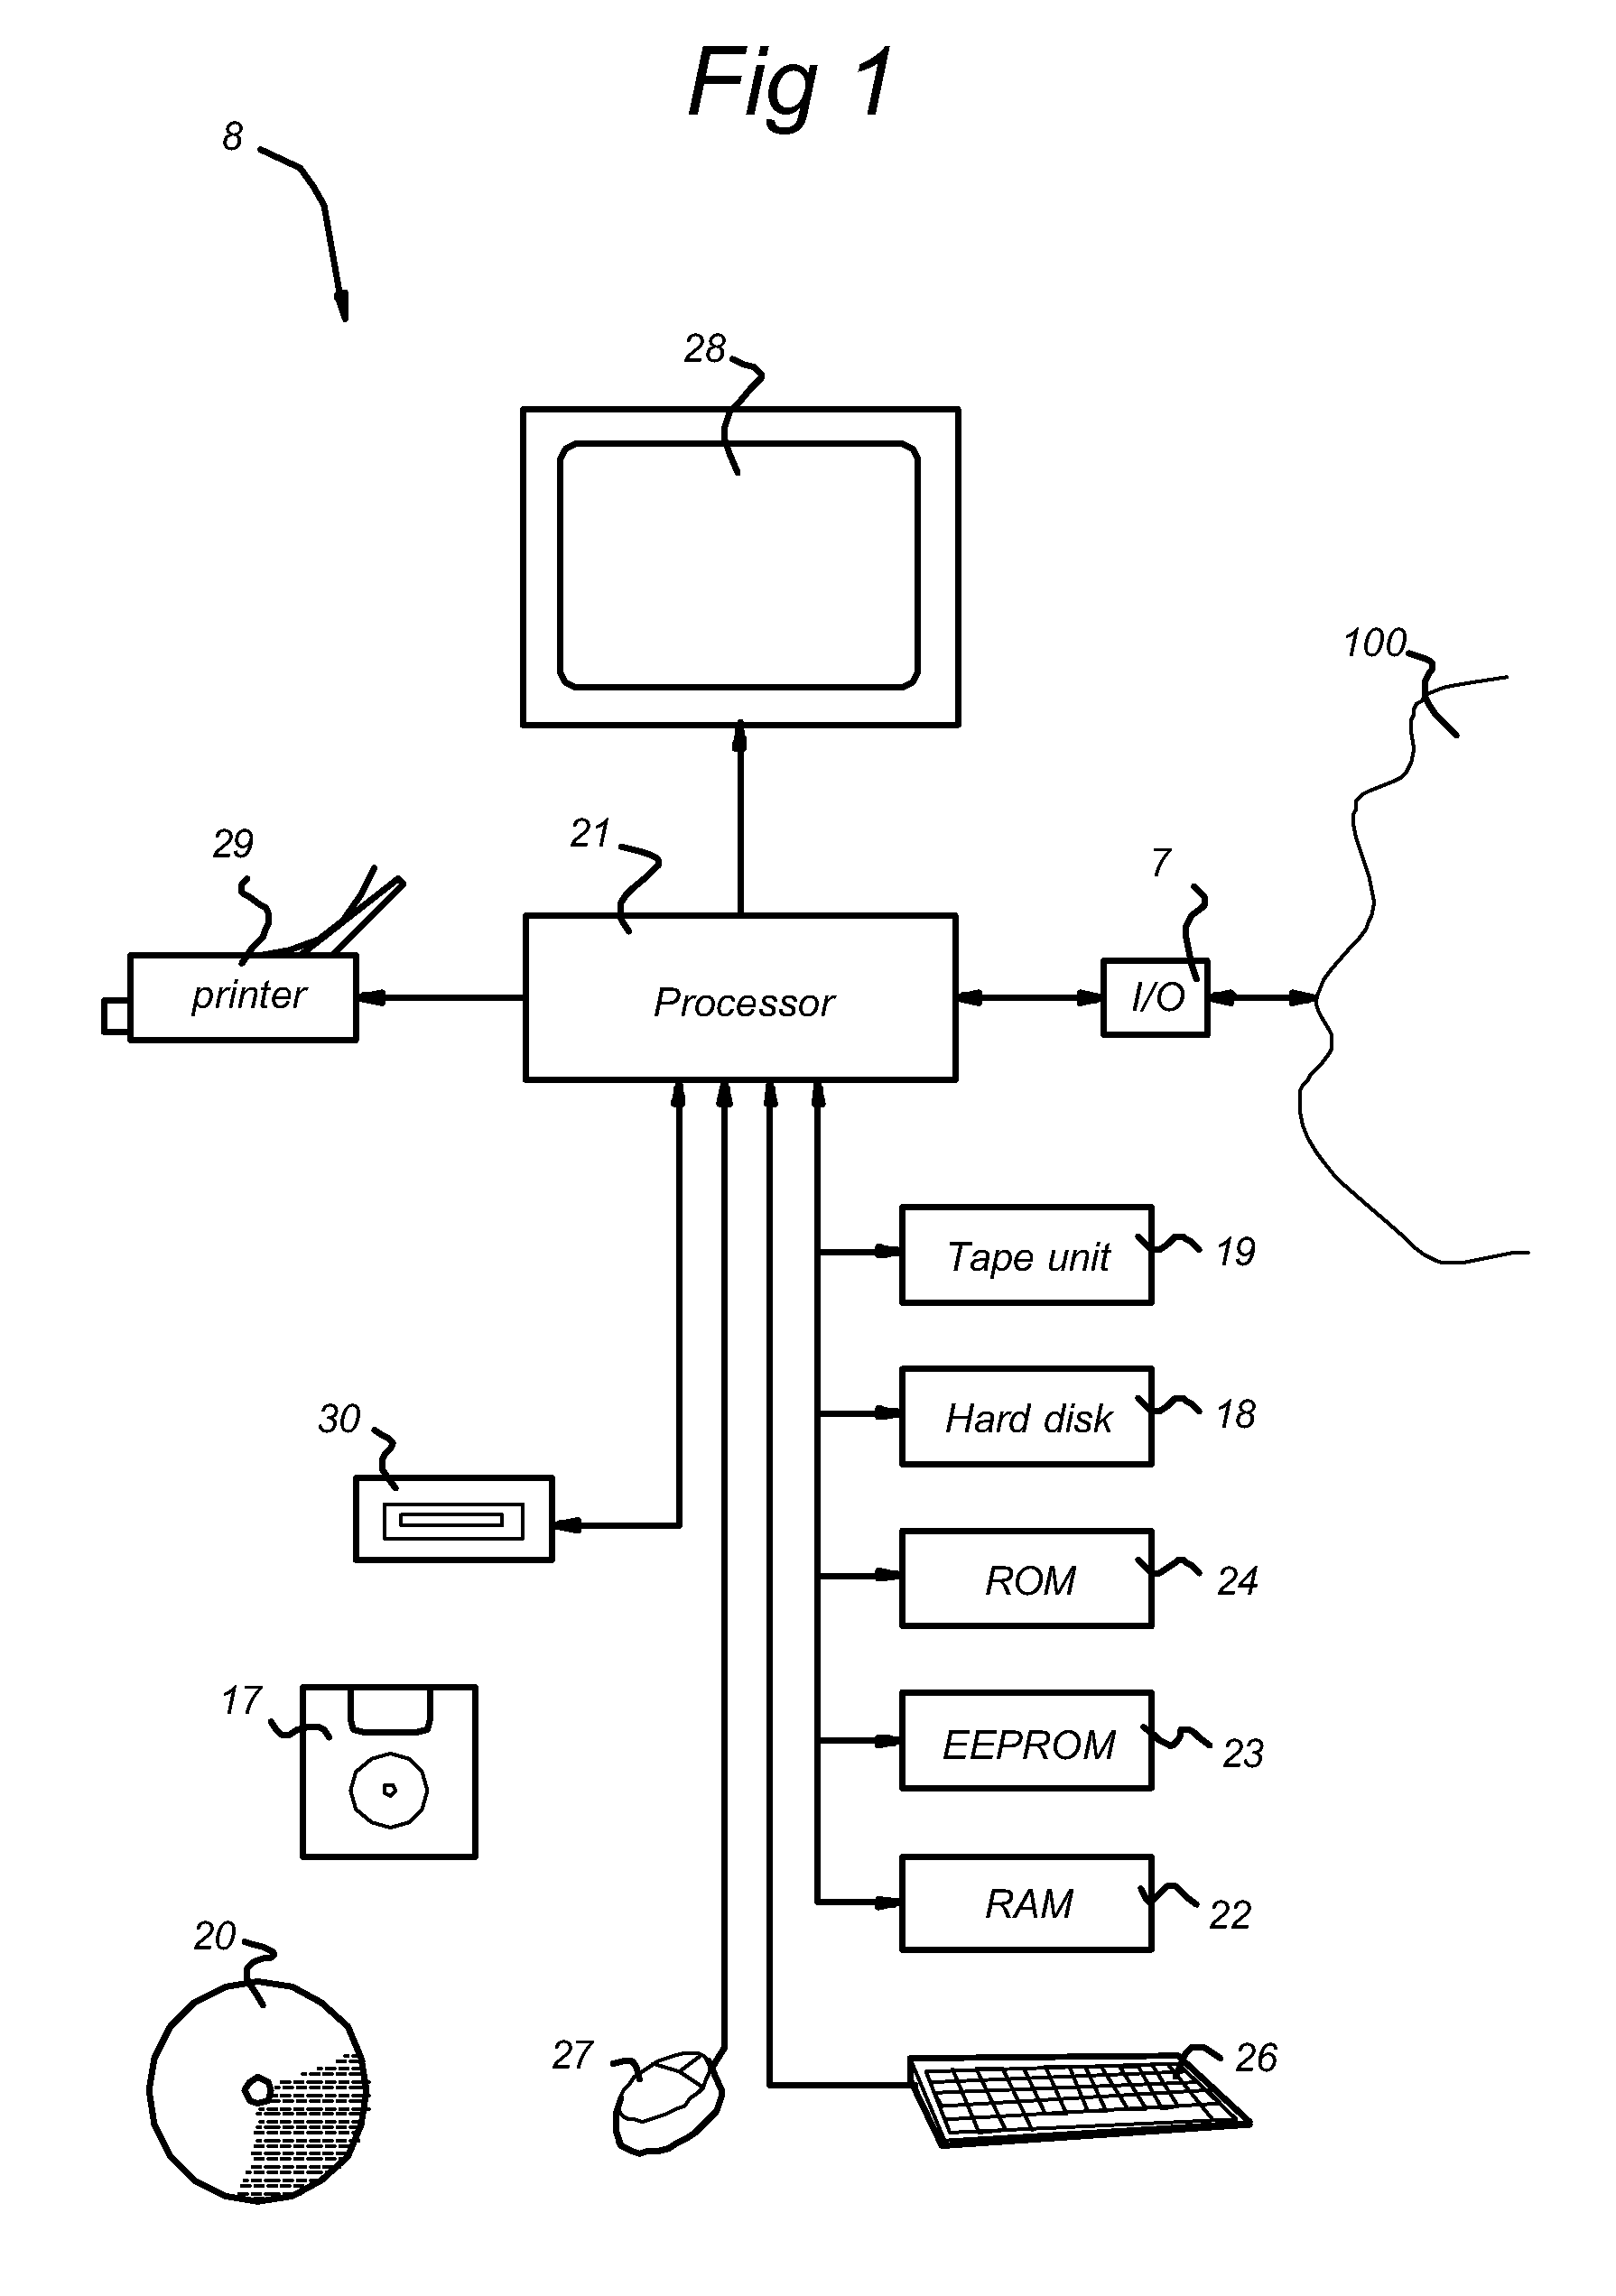 System, tool and method for network monitoring and corresponding network